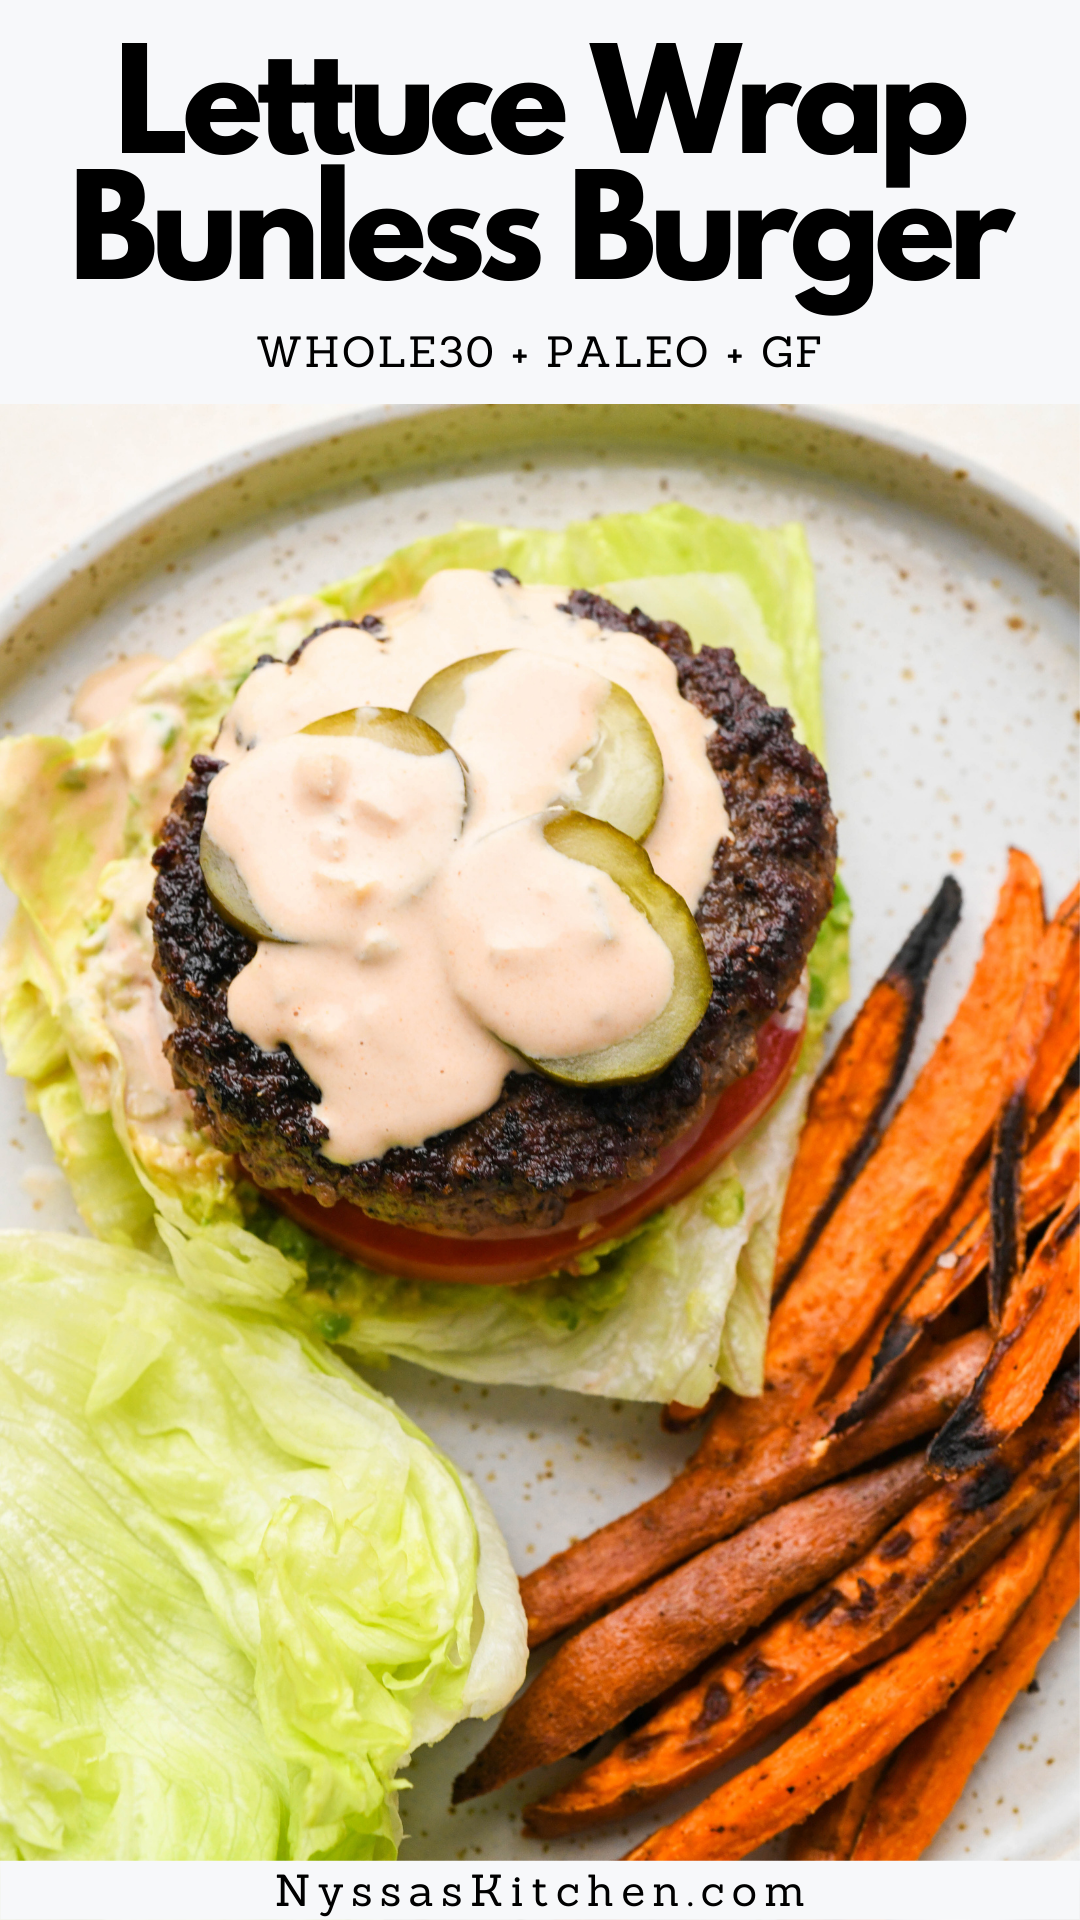 The ultimate lettuce wrap burger! Perfect for those nights when you just NEED a burger in your life. Made with seared burger patties, all the toppings, and a crave worthy burger sauce that you'll want to put on everything! Whole30, paleo friendly, gluten free, dairy free, keto, and low carb.